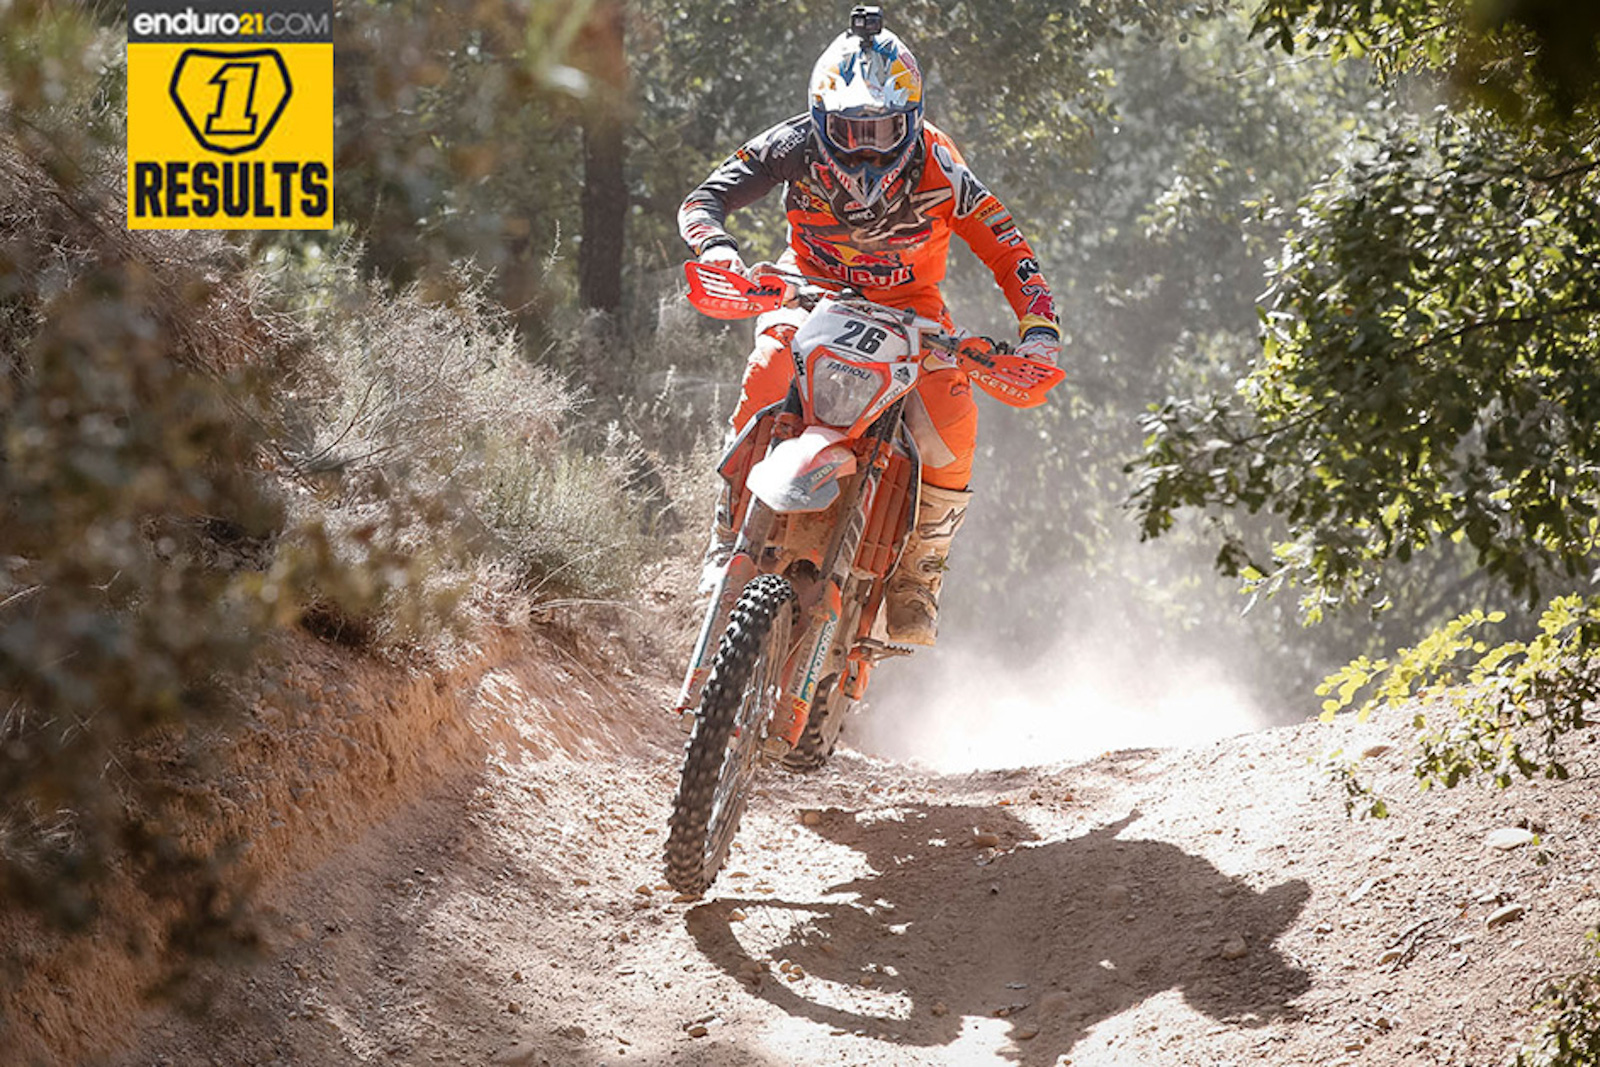 Results feed: WESS win for Josep Garcia on opening day at BR2 Enduro Solsona 